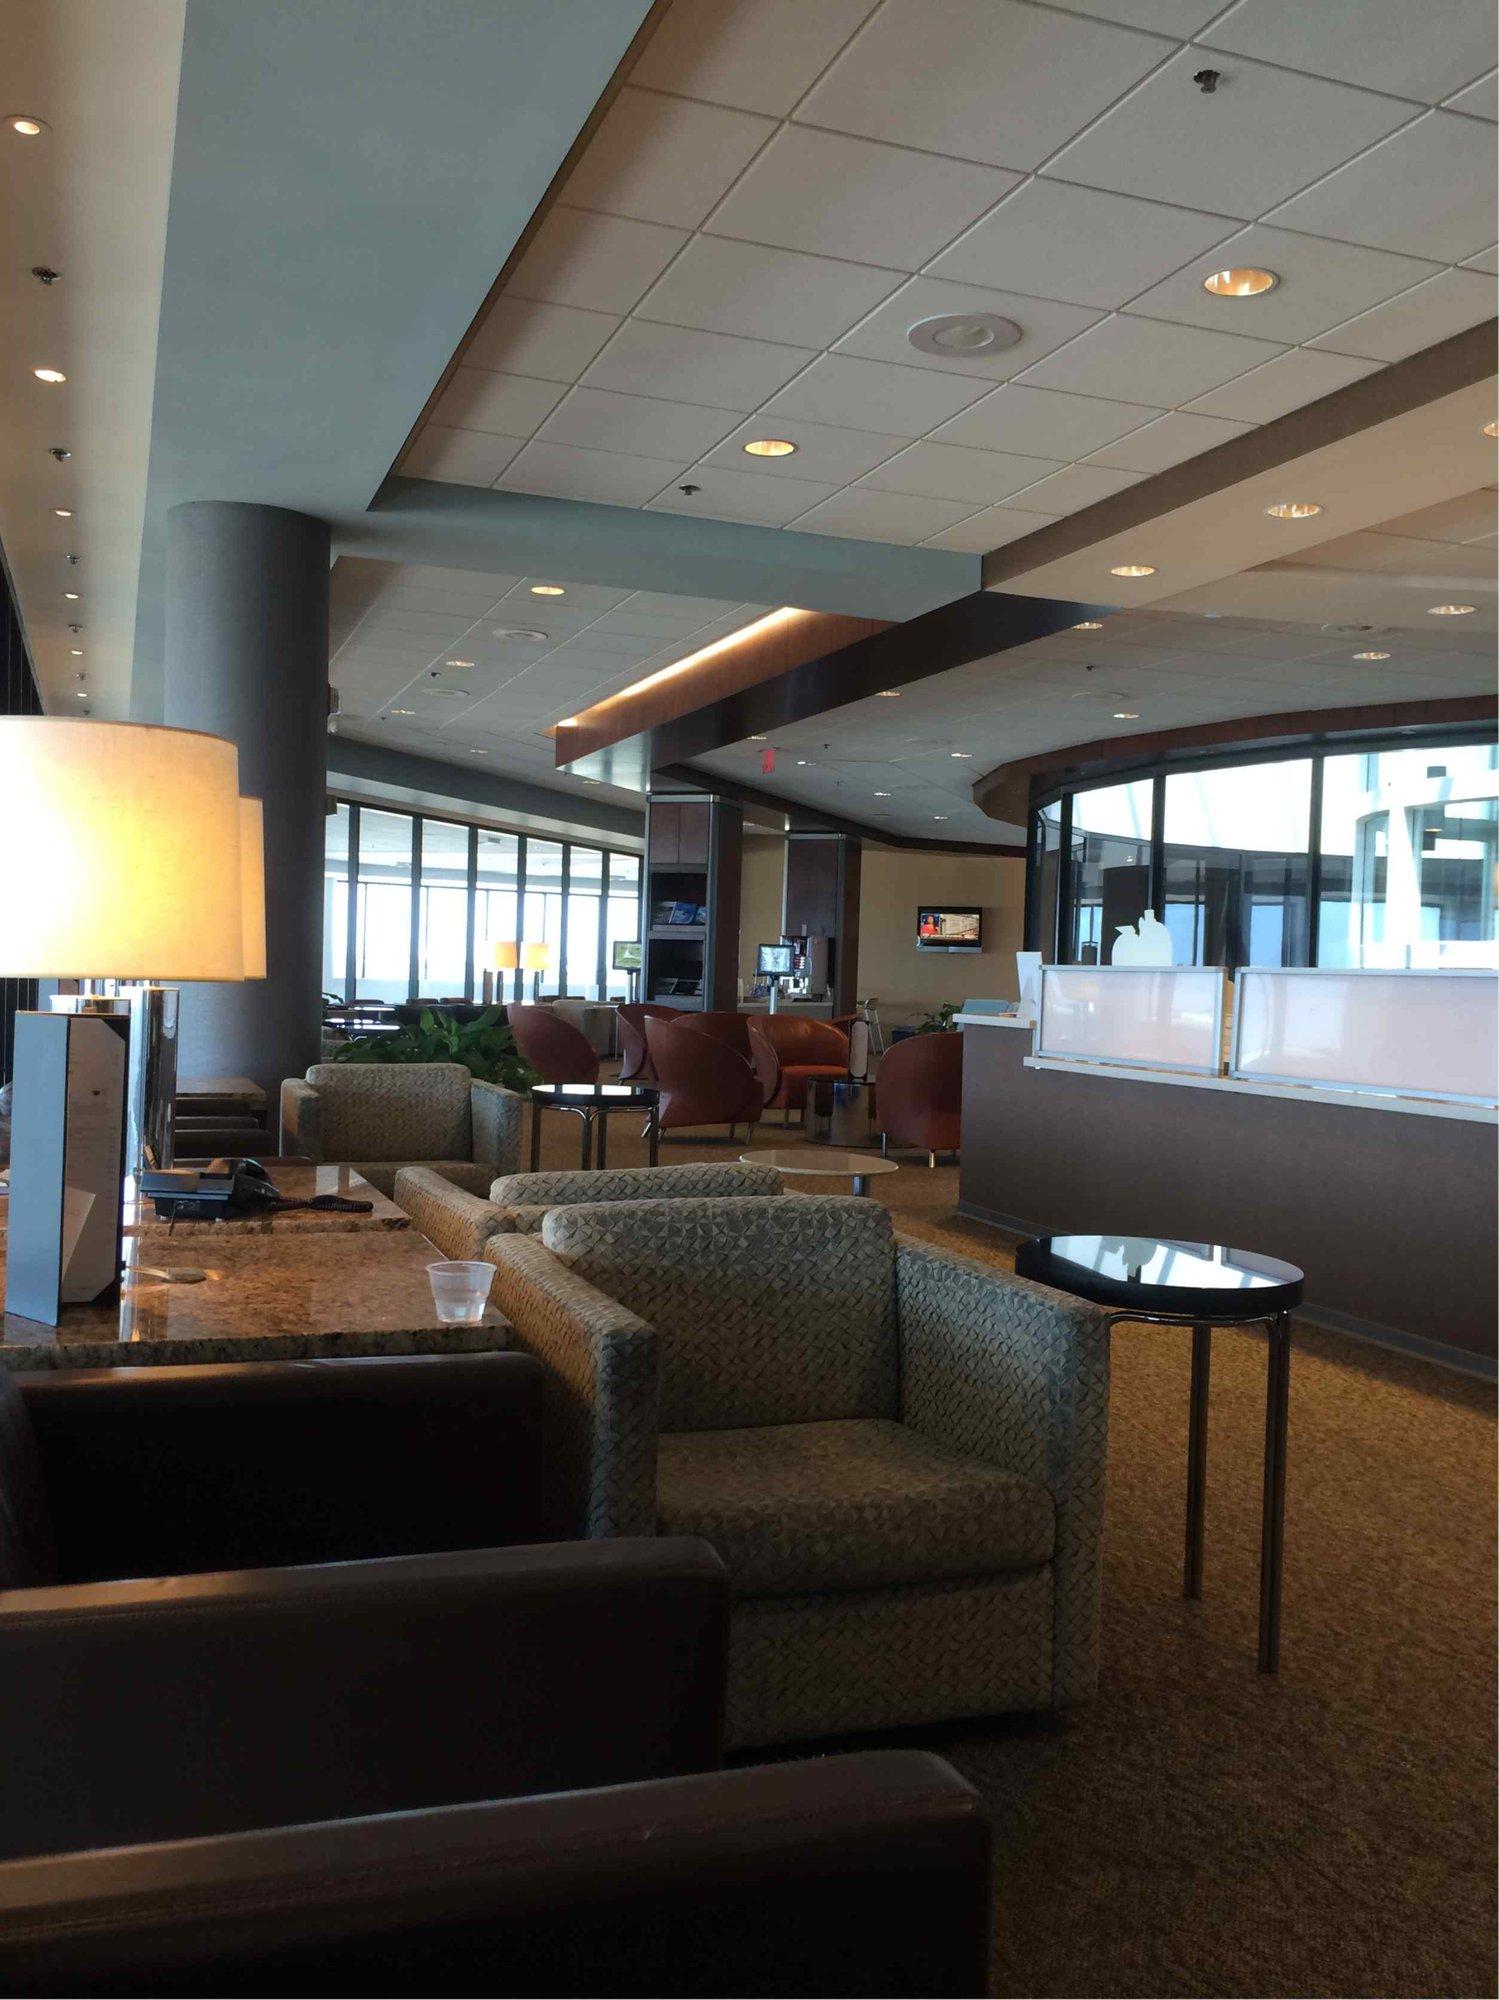 American Airlines Admirals Club image 9 of 16